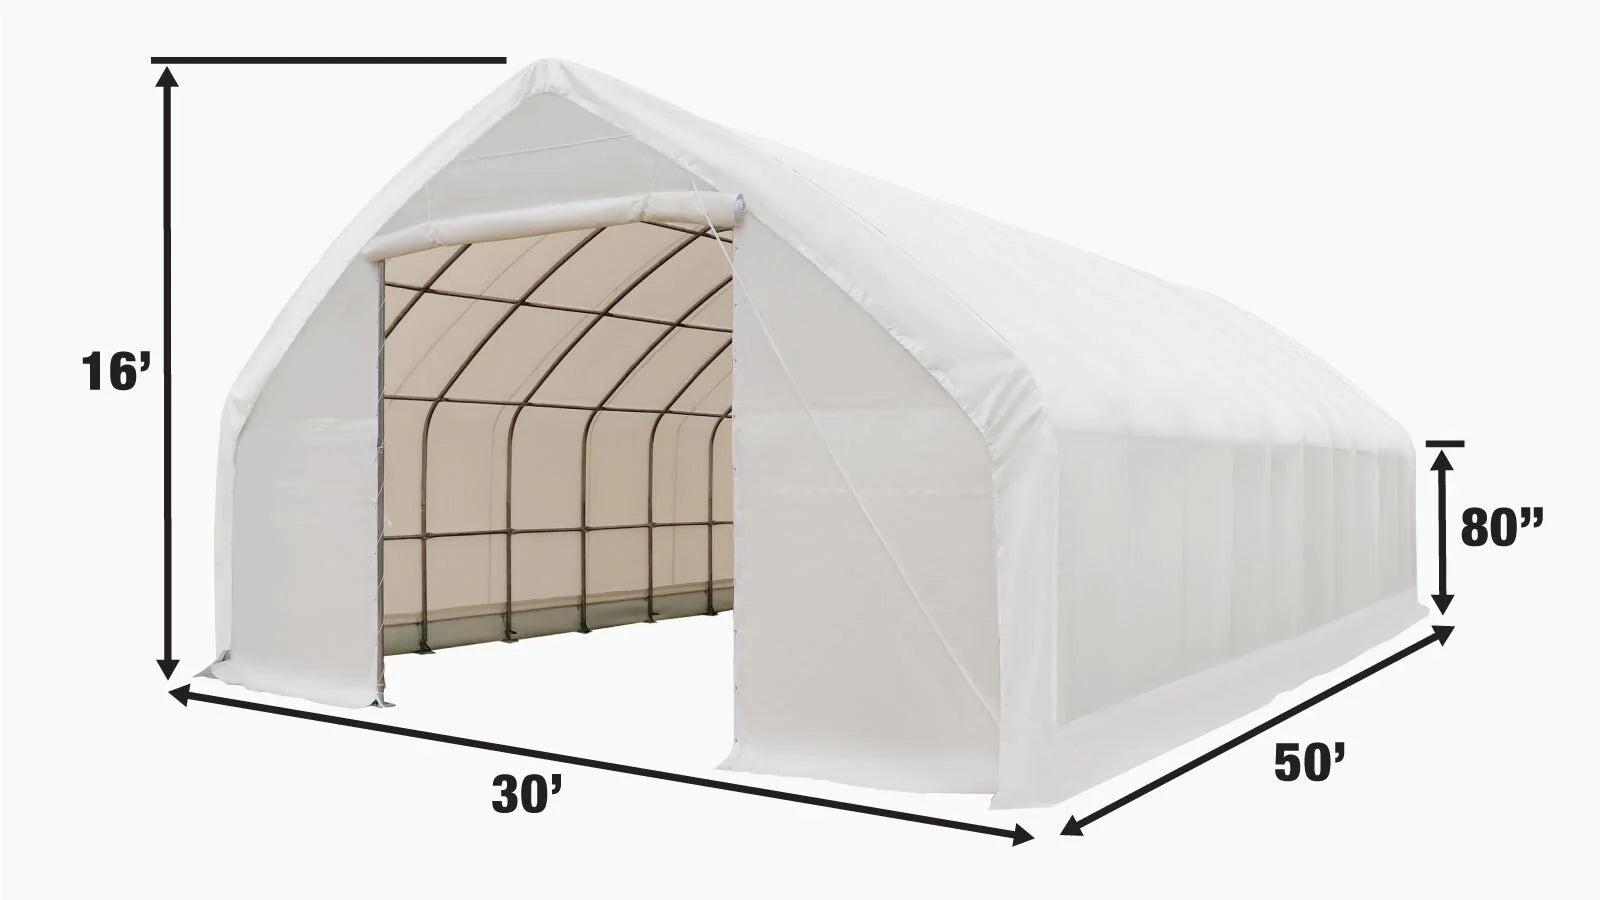 TMG Industrial 30' x 50' Straight Wall Peak Ceiling Storage Shelter with Heavy Duty 11 oz PE Cover & Drive Through Doors, TMG-ST3050E(Previously ST3050)-specifications-image